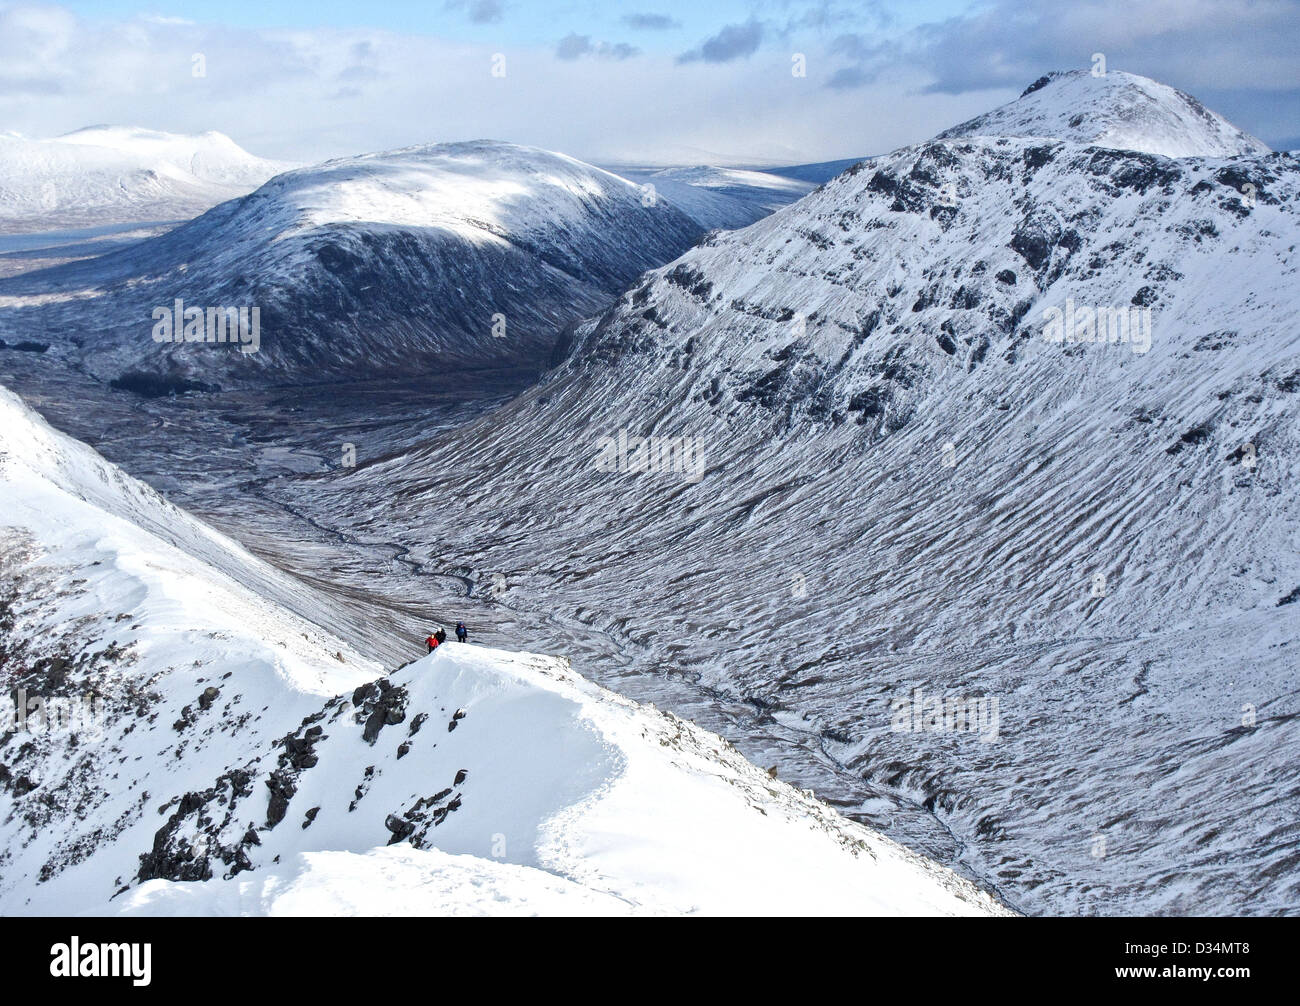 A group of winter mountaineers on the Scottish mountain Buachaille Etive Beag  in Glencoe  in Scottish highlands, Scotland UK Stock Photo